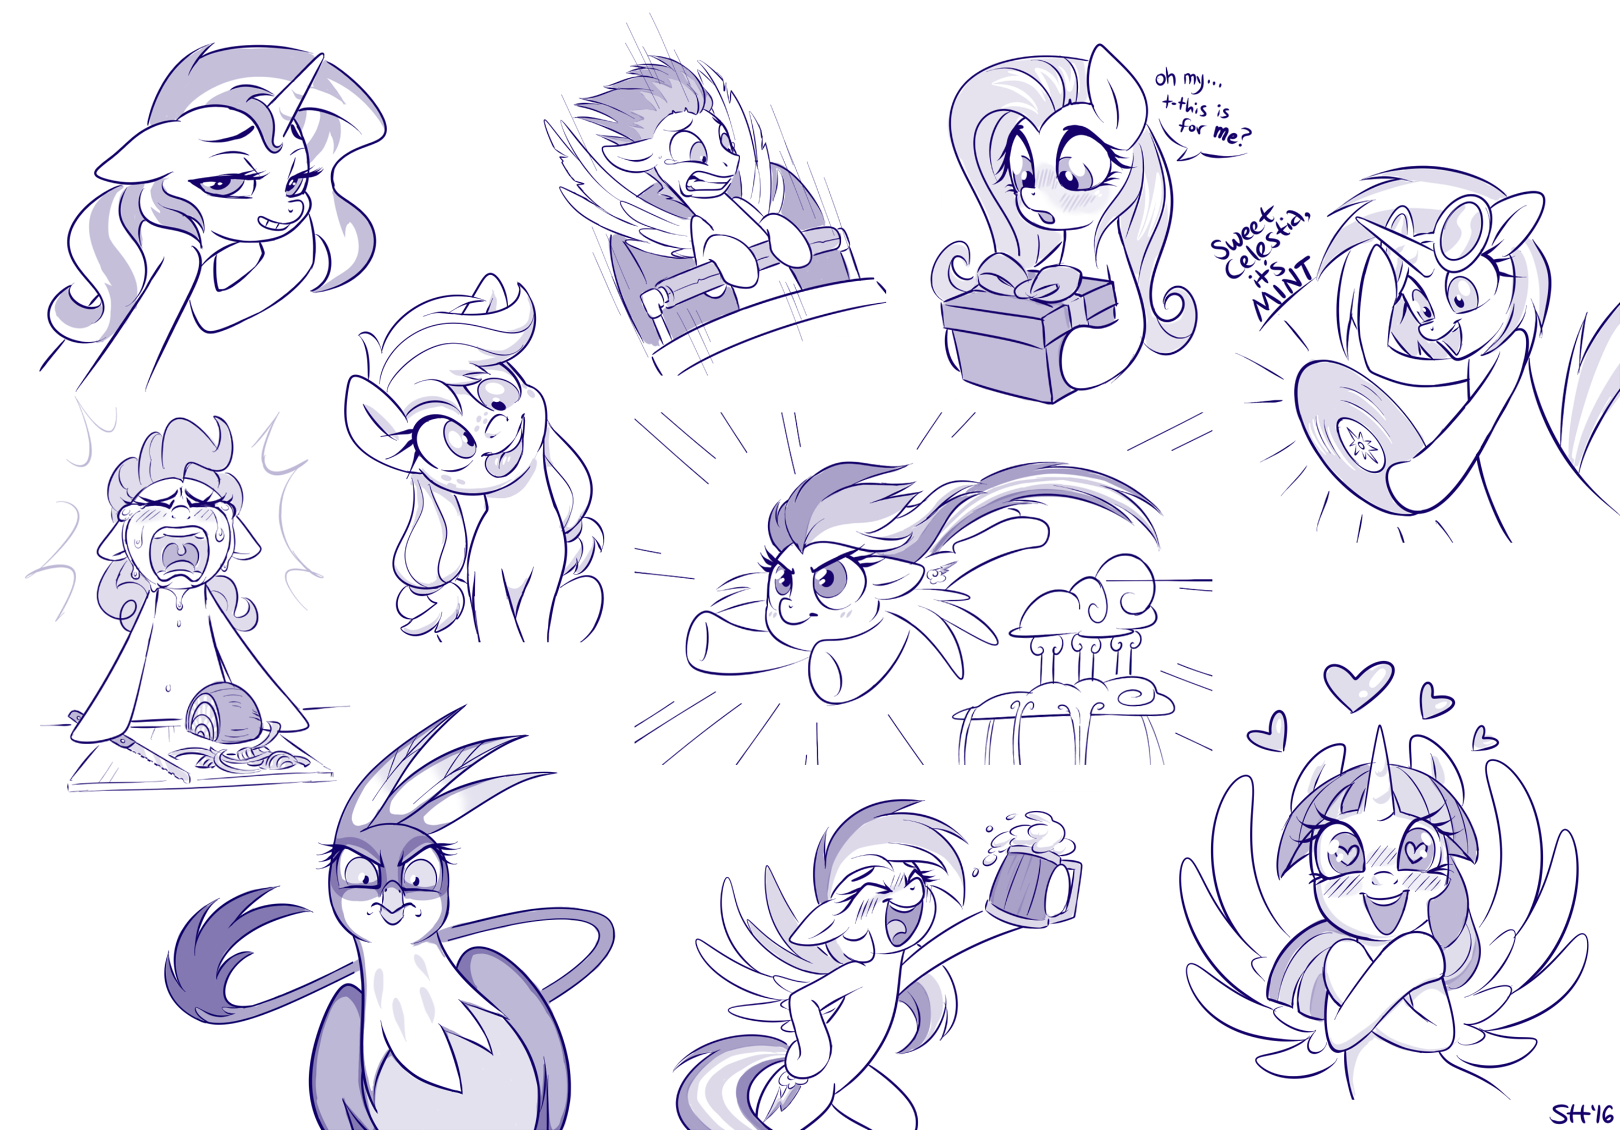 Pony Expressions 2!